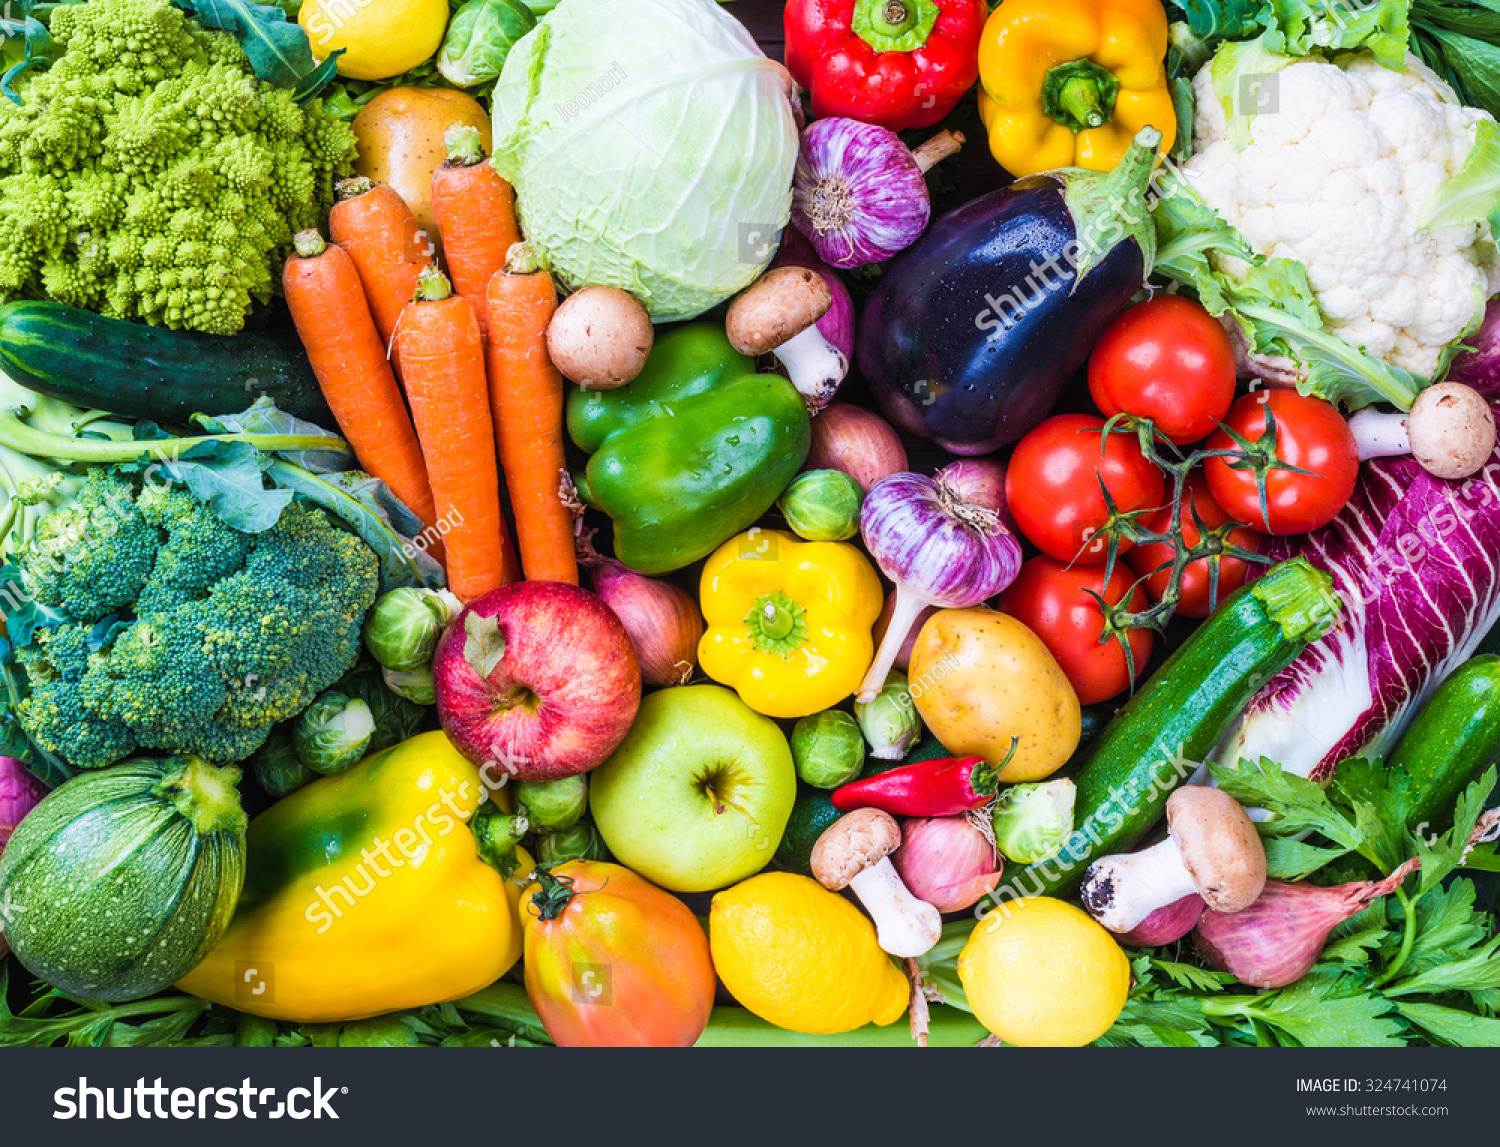 Vegetables and fruits healthy background.Healthy organic food concept. #324741074